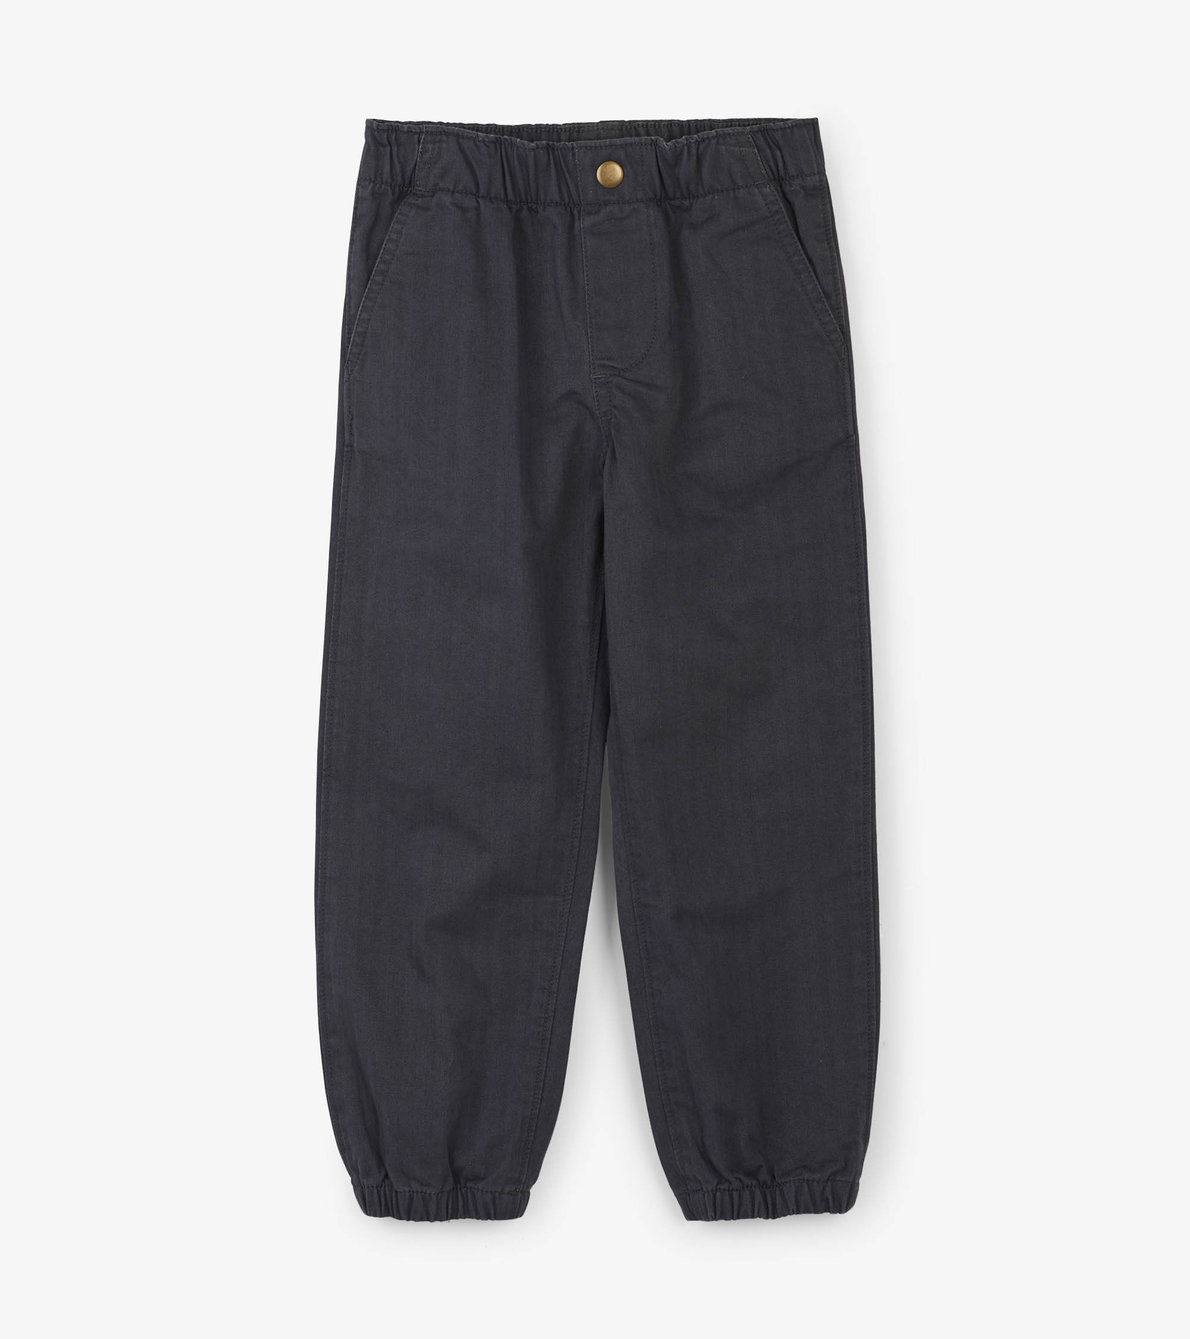 View larger image of Charcoal Melange Joggers